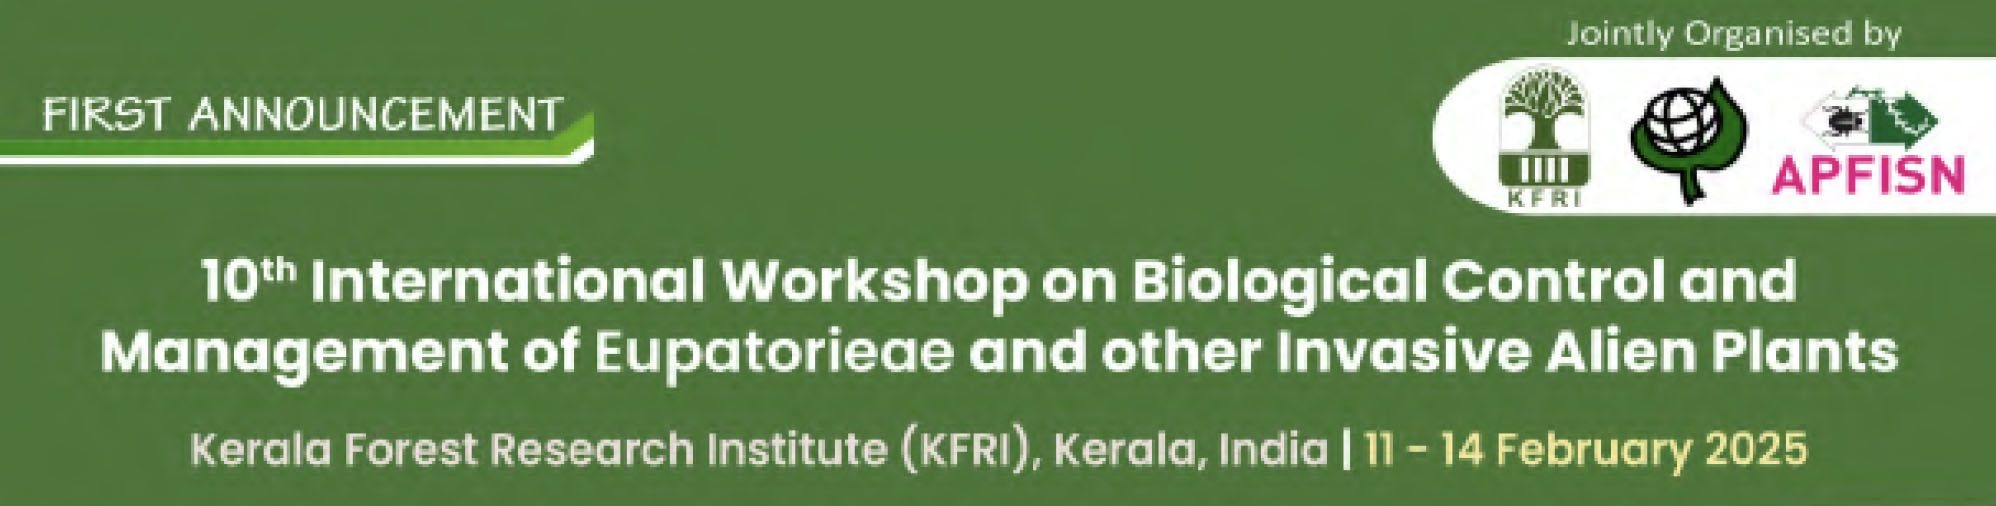 10th International Workshop on Biological Control and Management of Eupatorieae and other Invasive Alien Plants
11-14 February 2025, Kerala Forest Research Institute (KFRI), Kerala, India.